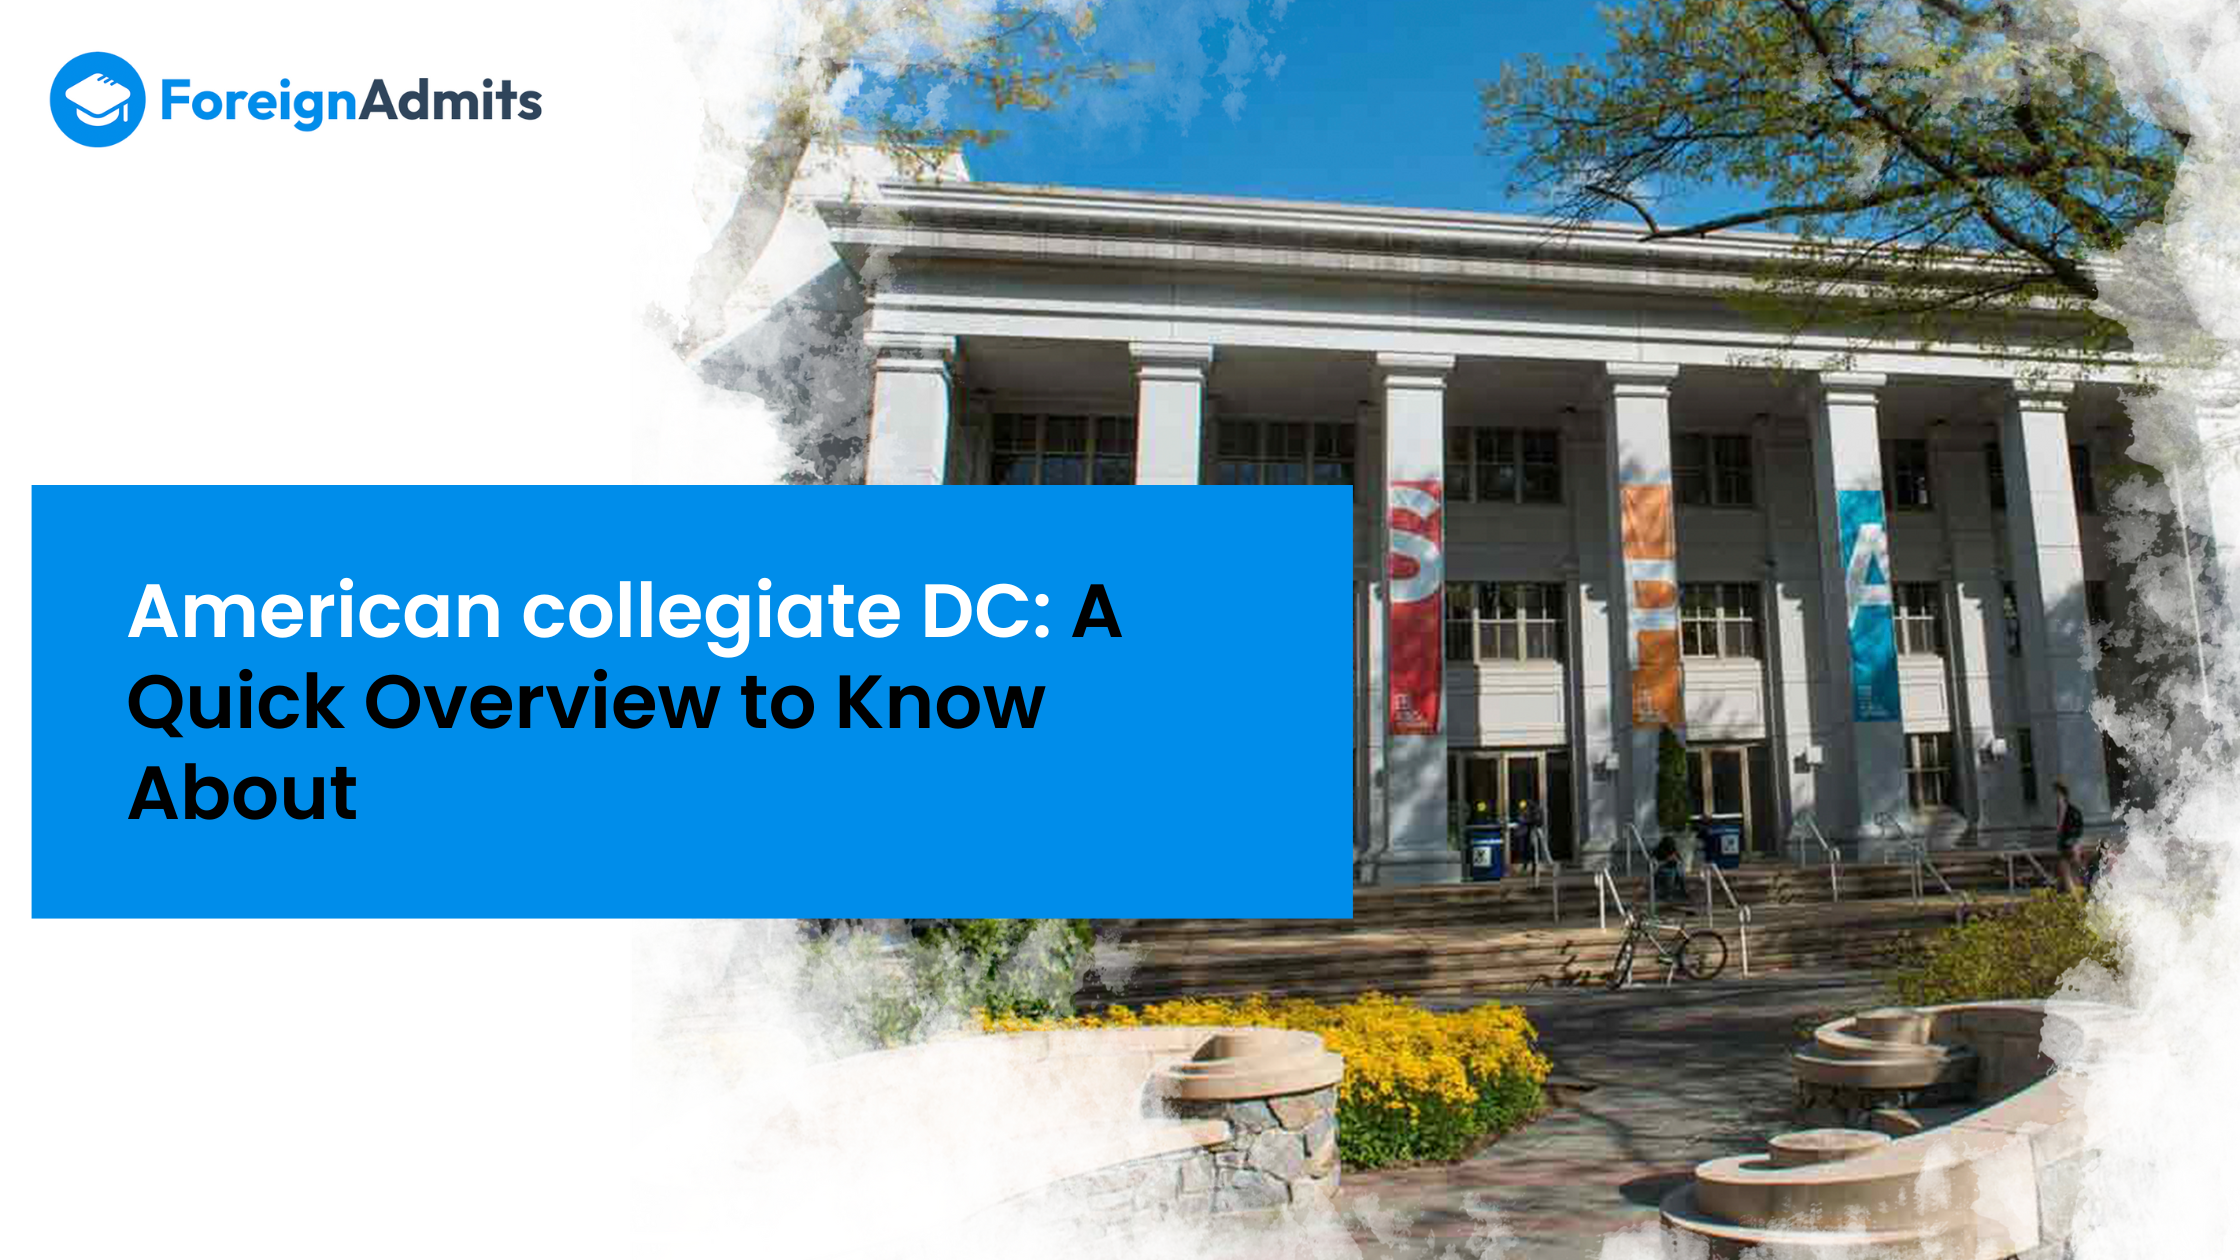 American Collegiate DC: A Quick Overview to Know About